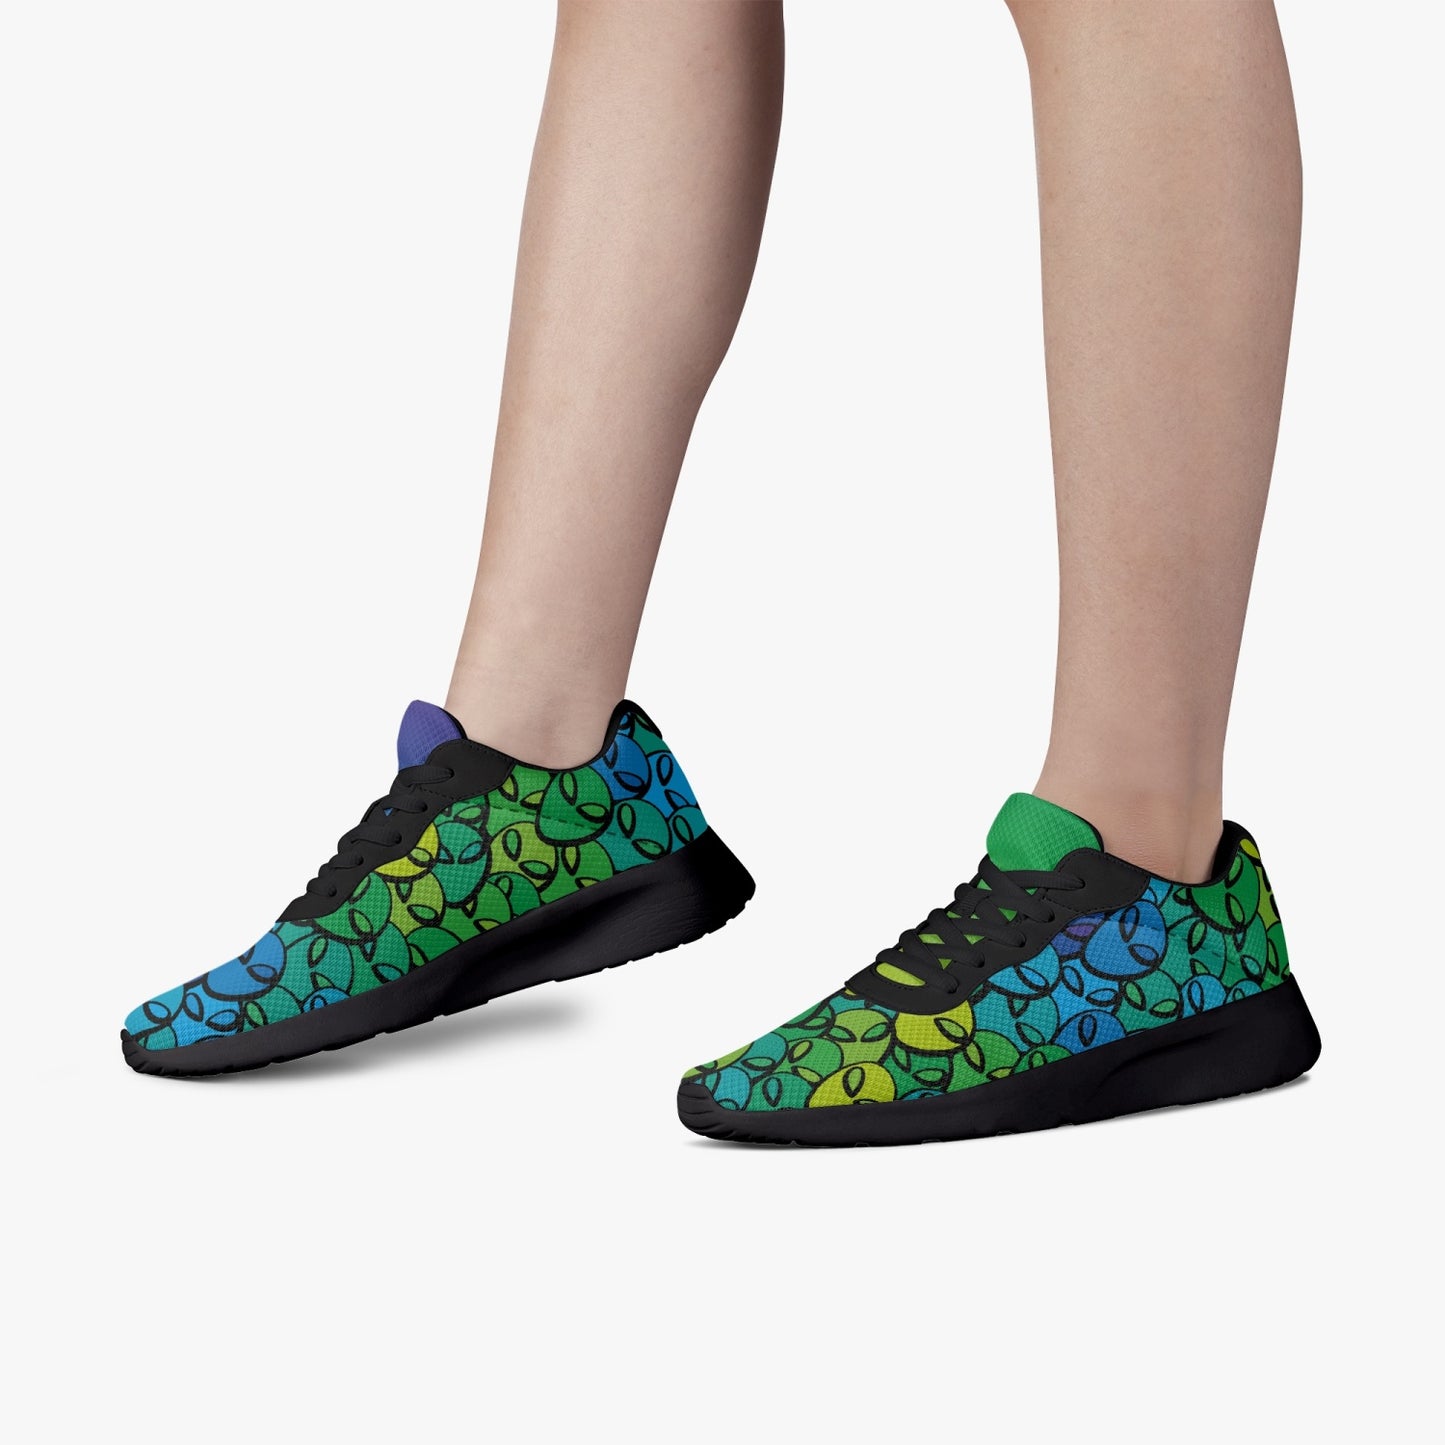 Weirdo | colorful shoes for women. These blue / green mesh shoes have aliens printed all over the shoes and are both a little different to give it some extra weirdness.